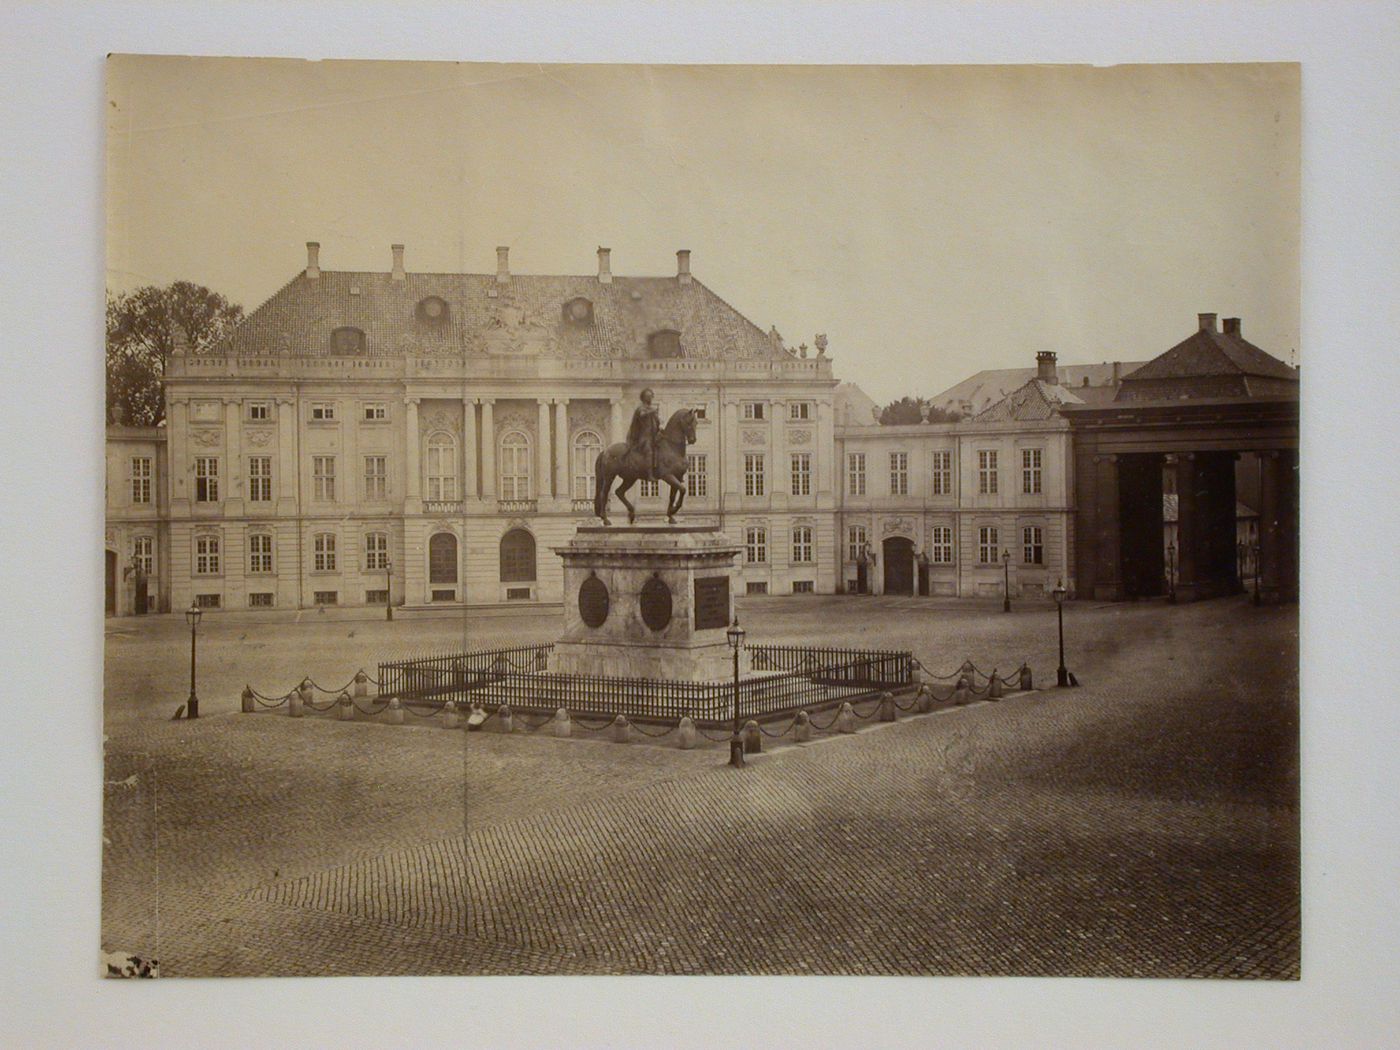 Partial view of Amalienborg Place with the equestrian statue of King Frederik V, Copenhagen, Denmark